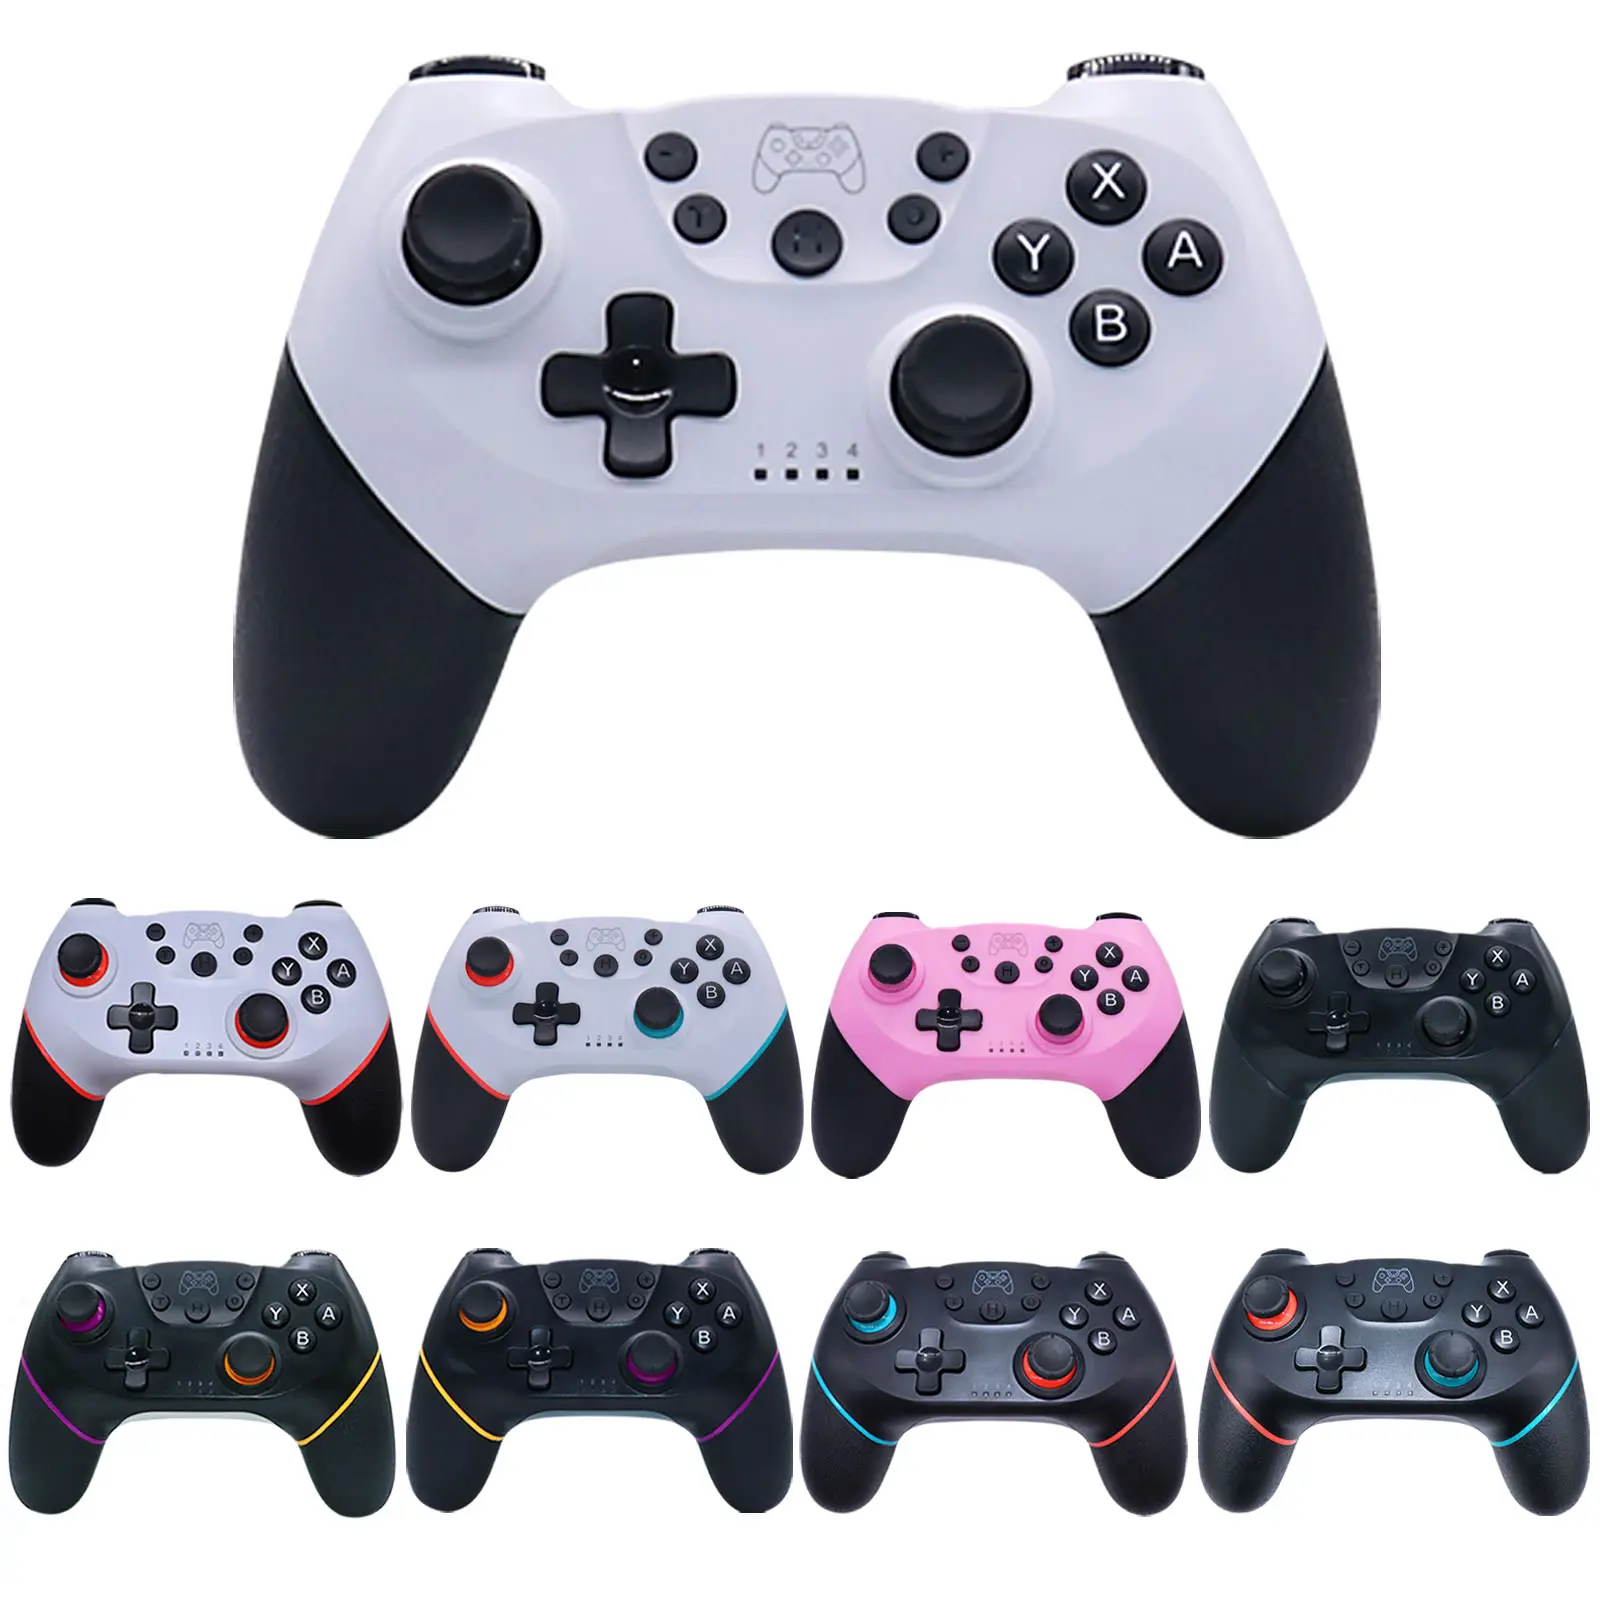 New Cheap Wireless Blue Tooth Gamepad With 6 Axes Turbo Function For Switch Pro Game Controller Joypad Joystick Remote Control